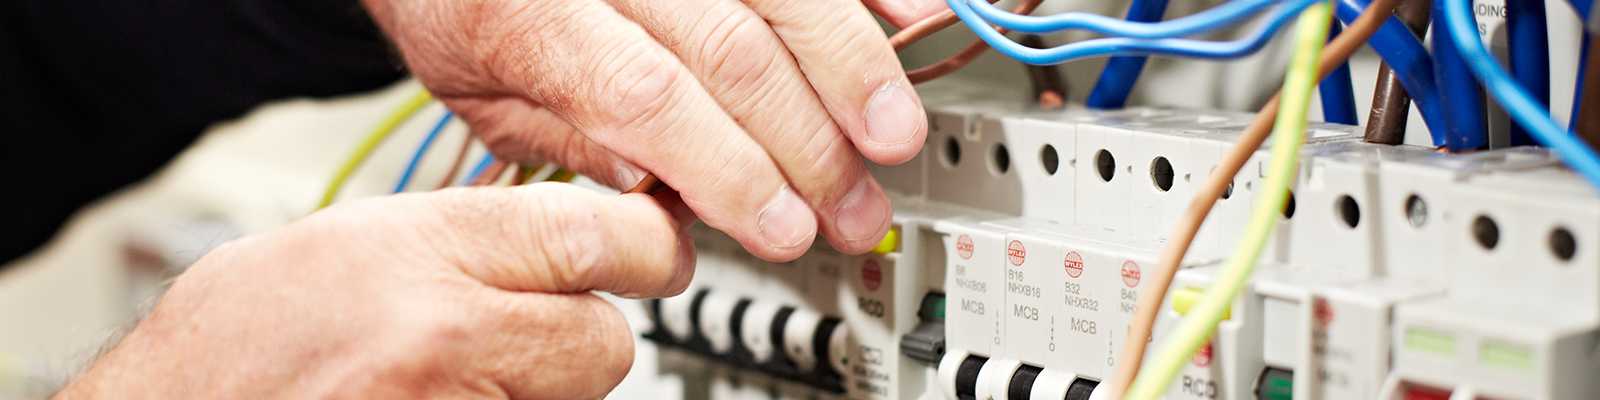 City & Guilds Level 3 Electrical Course